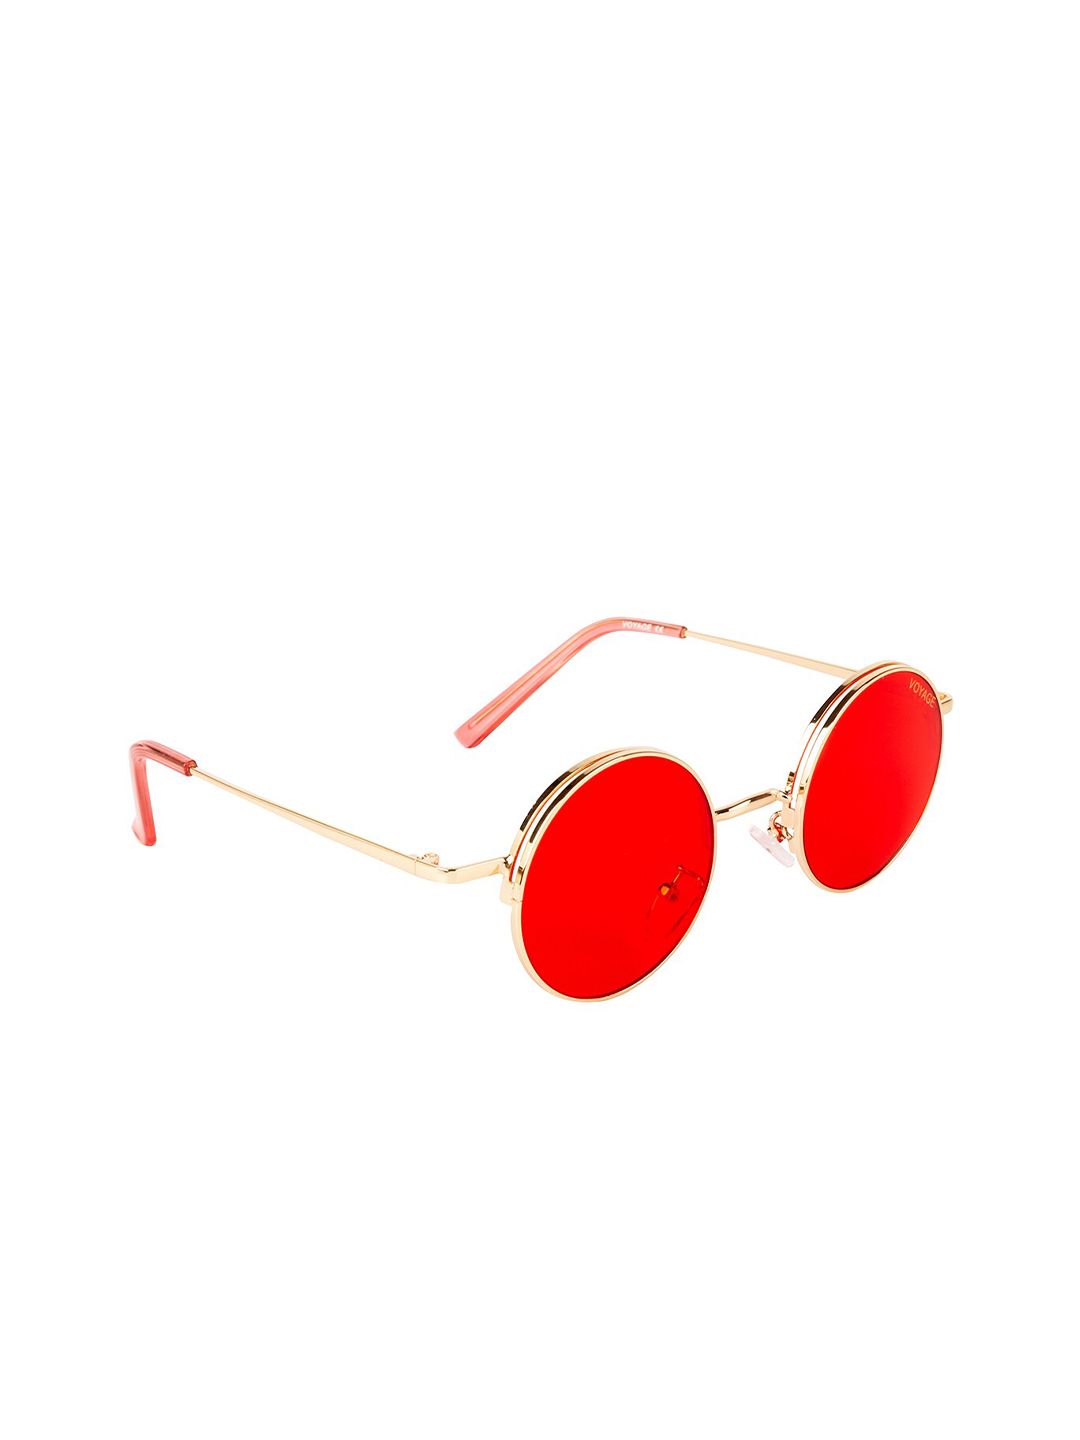 Voyage Unisex Red Lens Round Sunglasses with UV Protected Lens B80495MG3507C Price in India